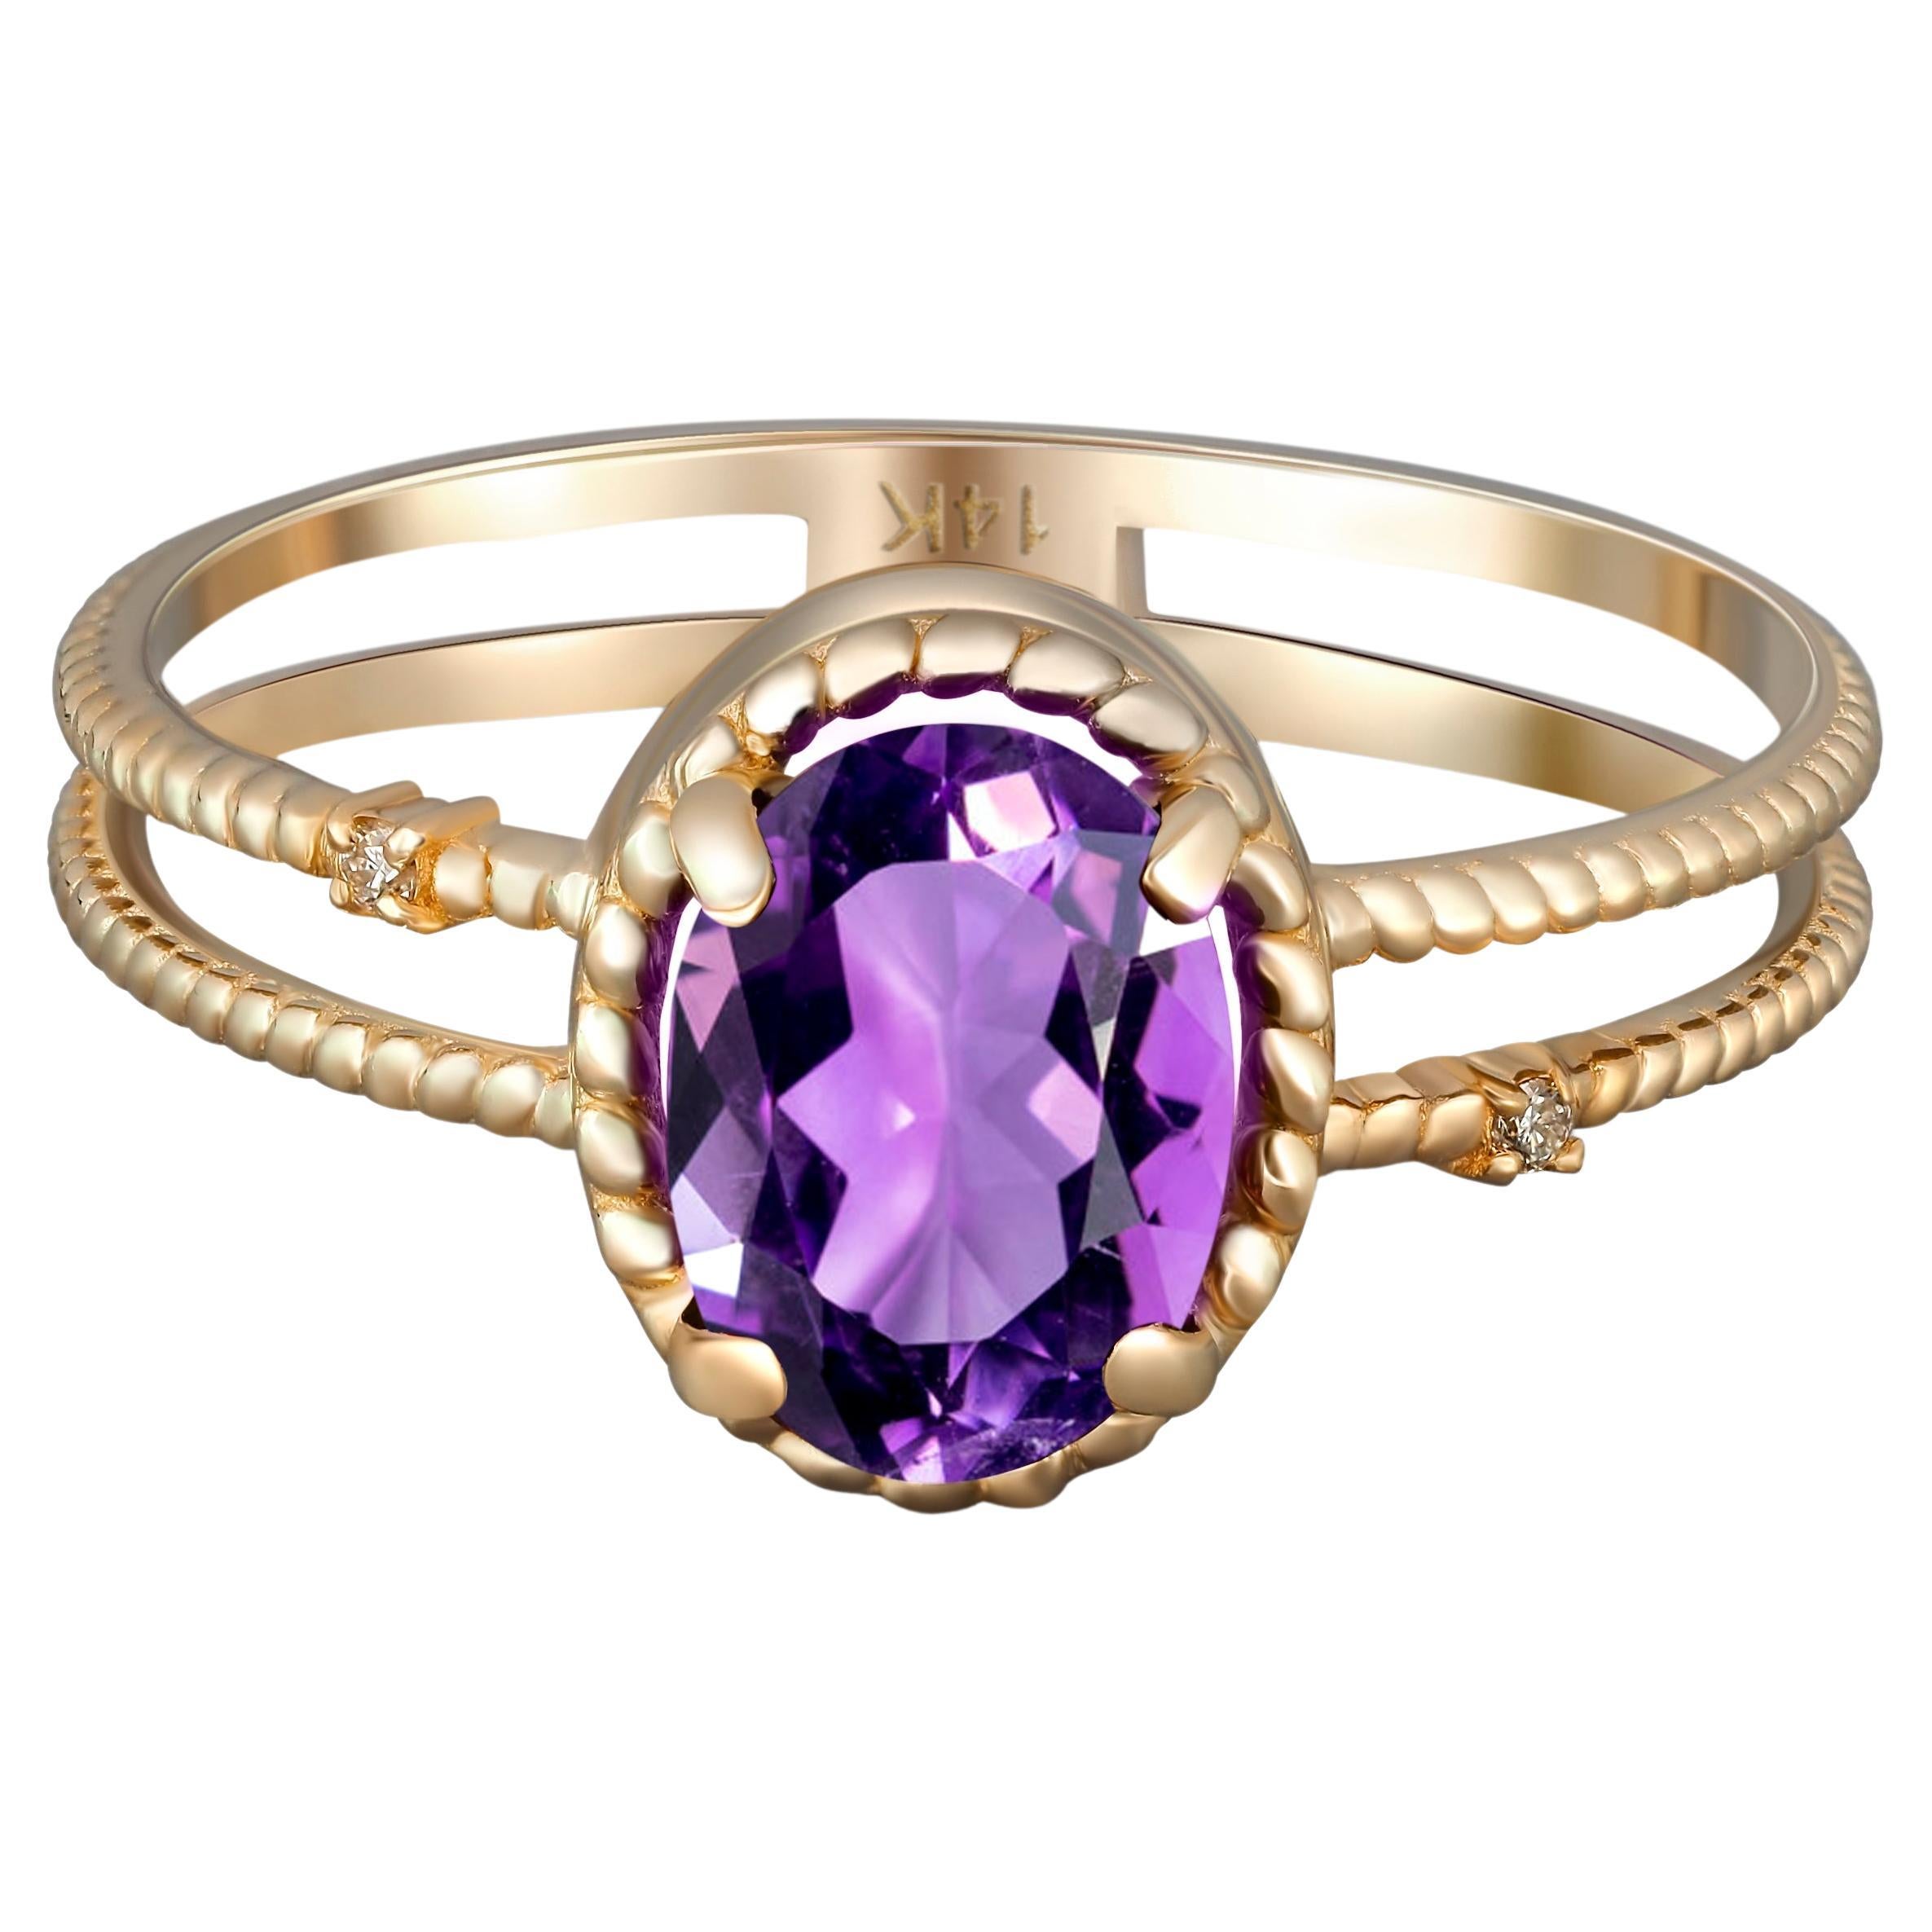 Amethyst Gold Ring, Oval Amethyst Ring, 14k Gold Ring with Amethyst